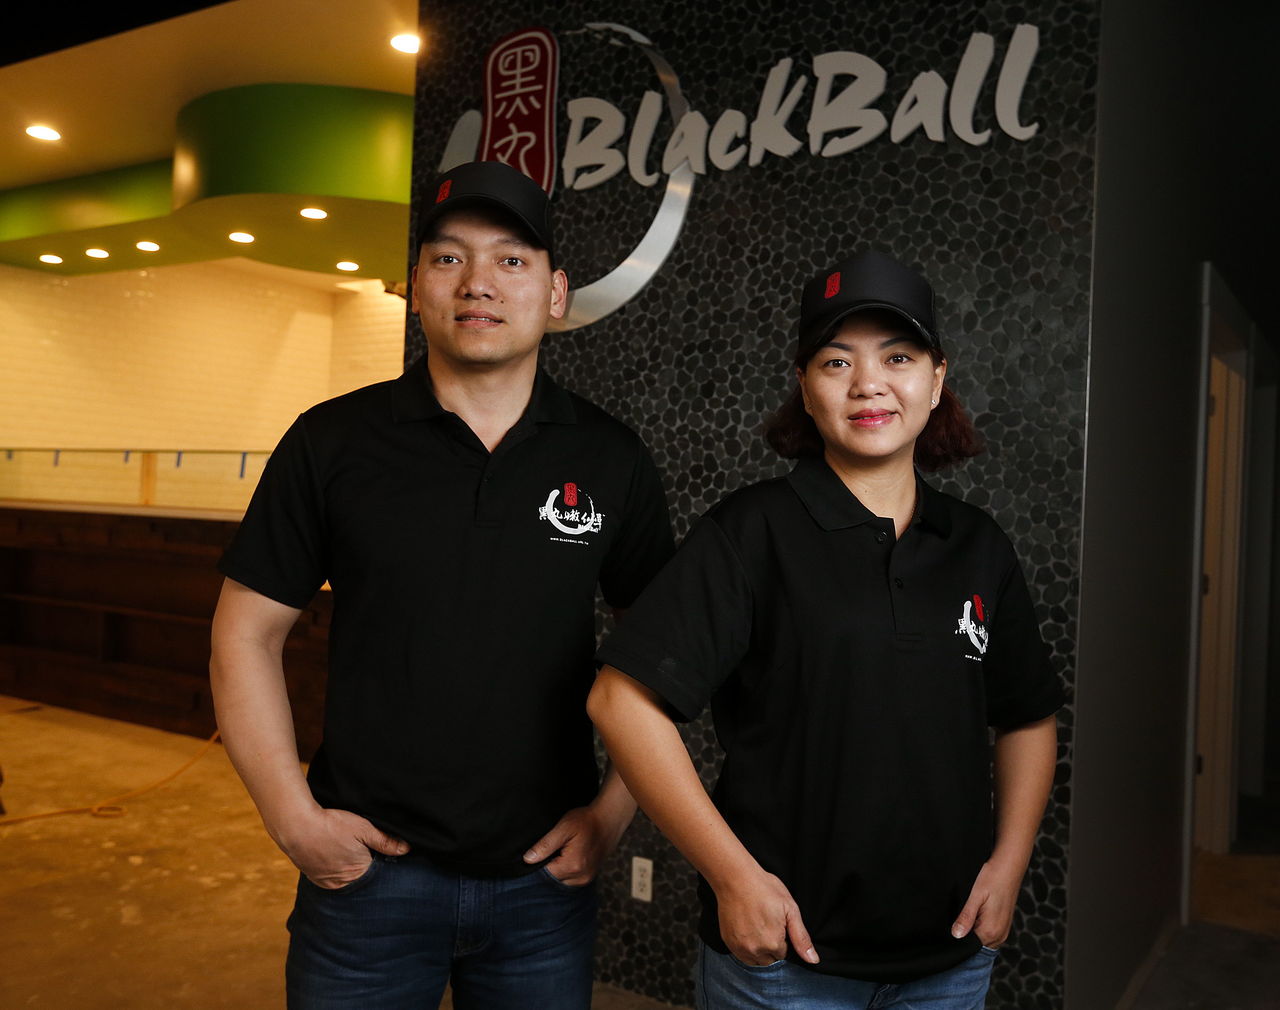 Siblings Tim (left) and Thuy Nguyen will open BlackBall, a Taiwanese dessert restaurant, on Highway 99 in Edmonds in April.